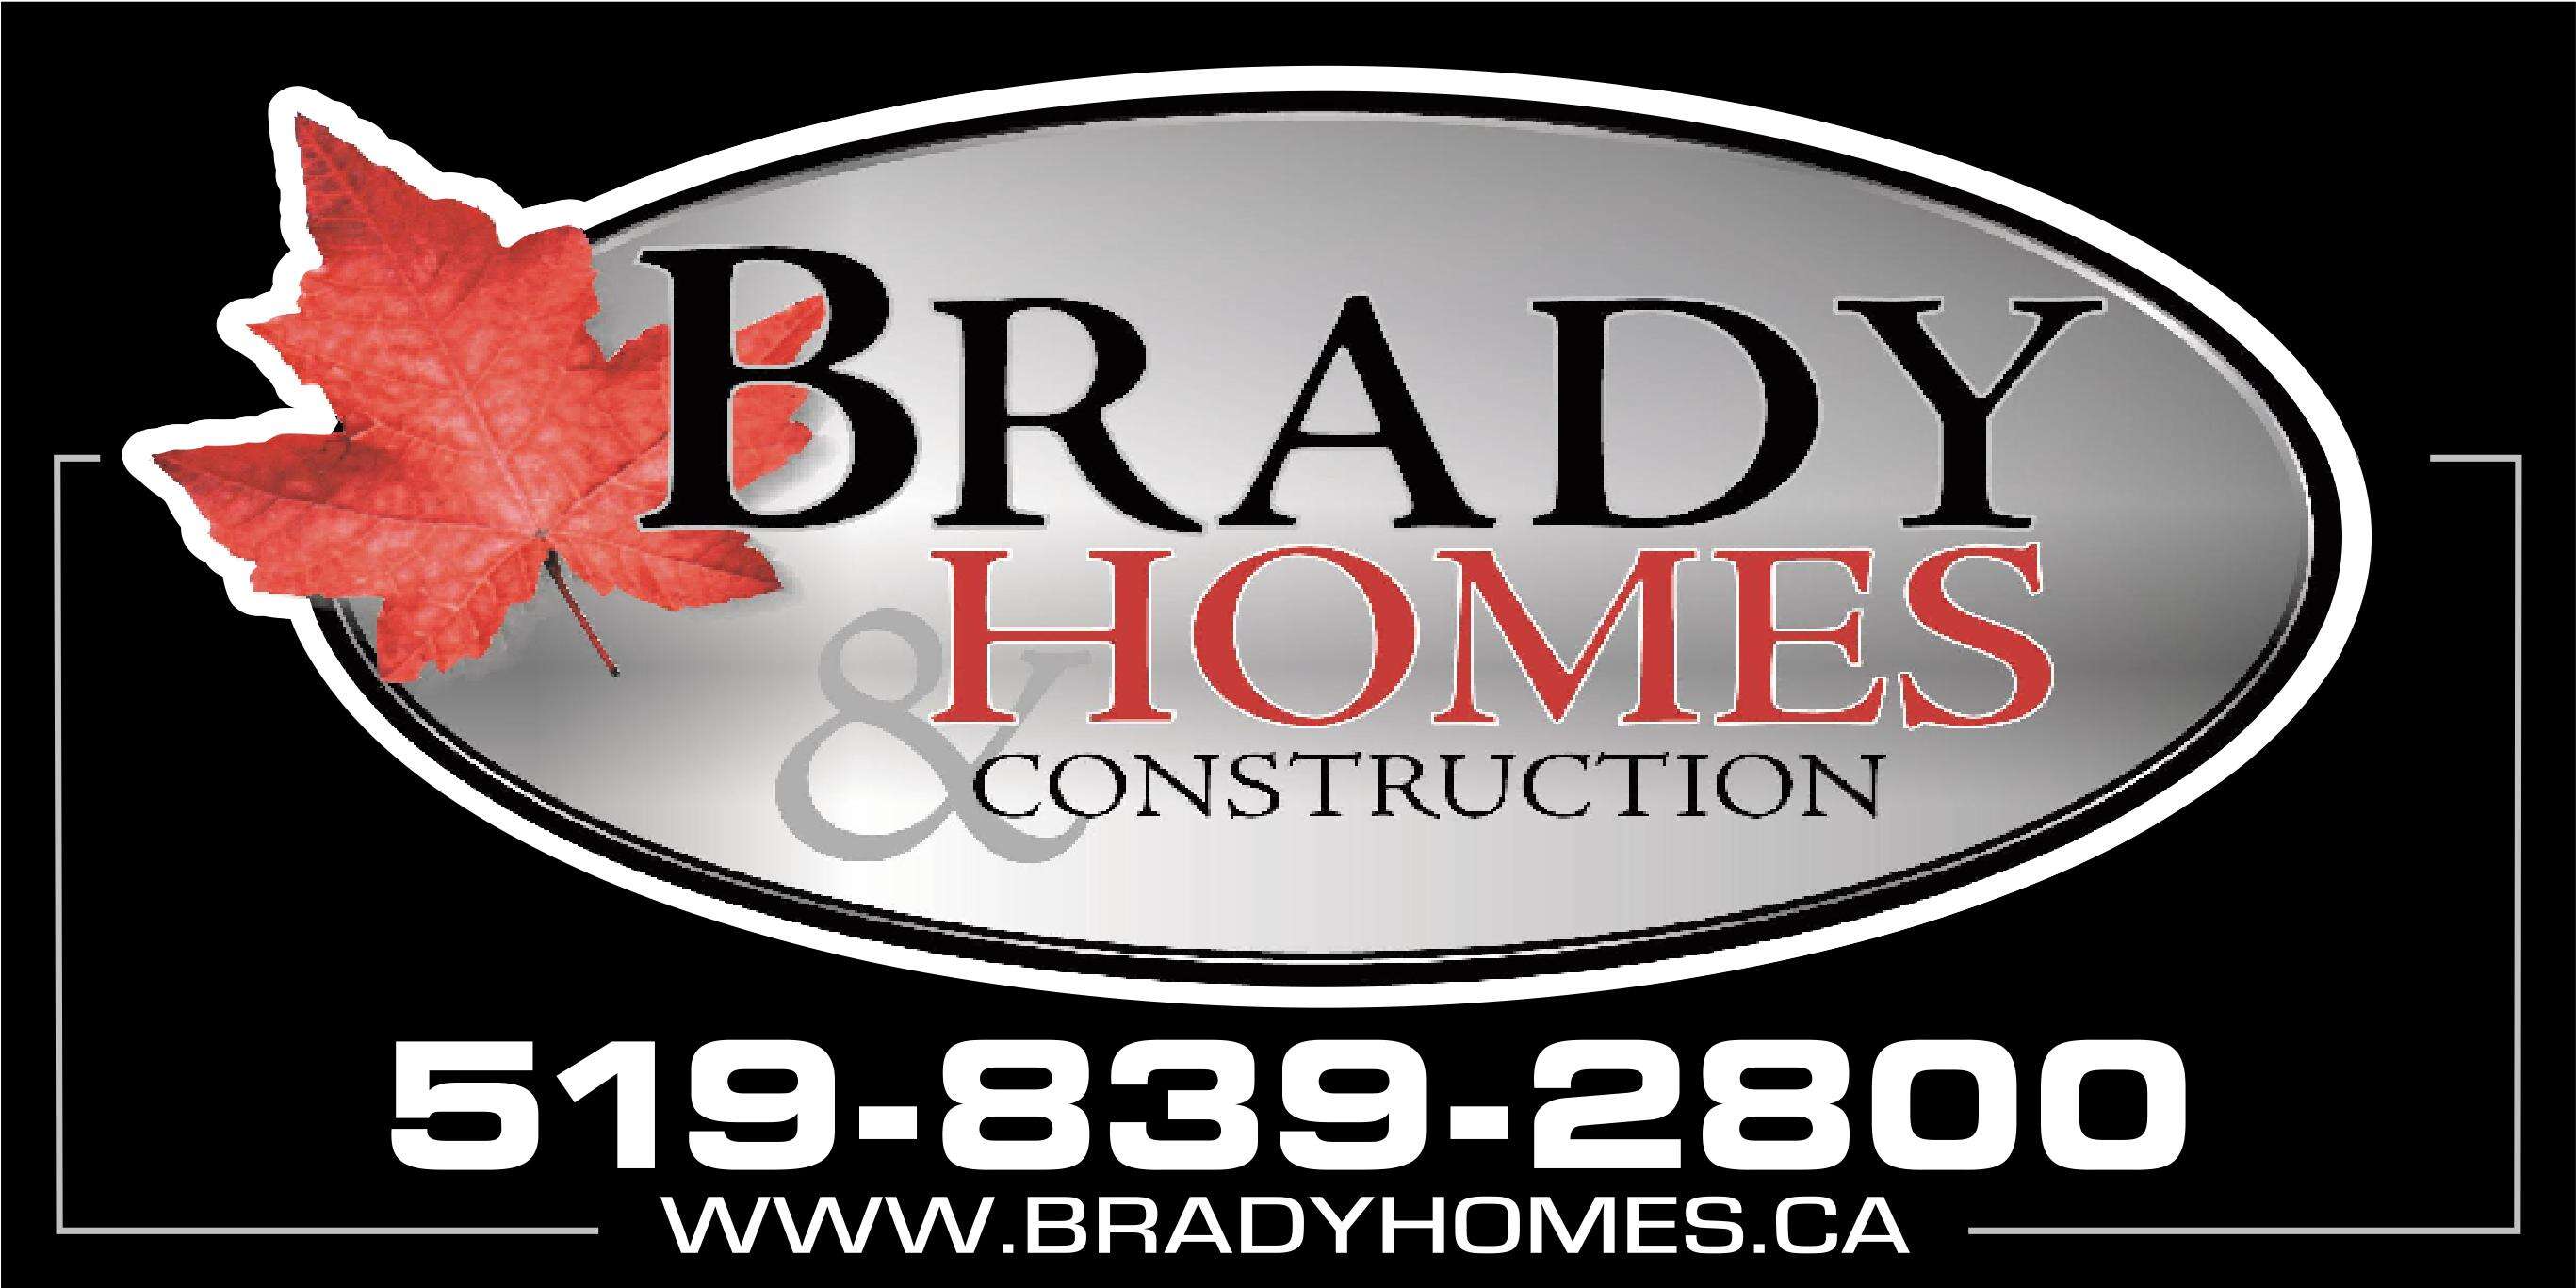 Brady Homes and Construction